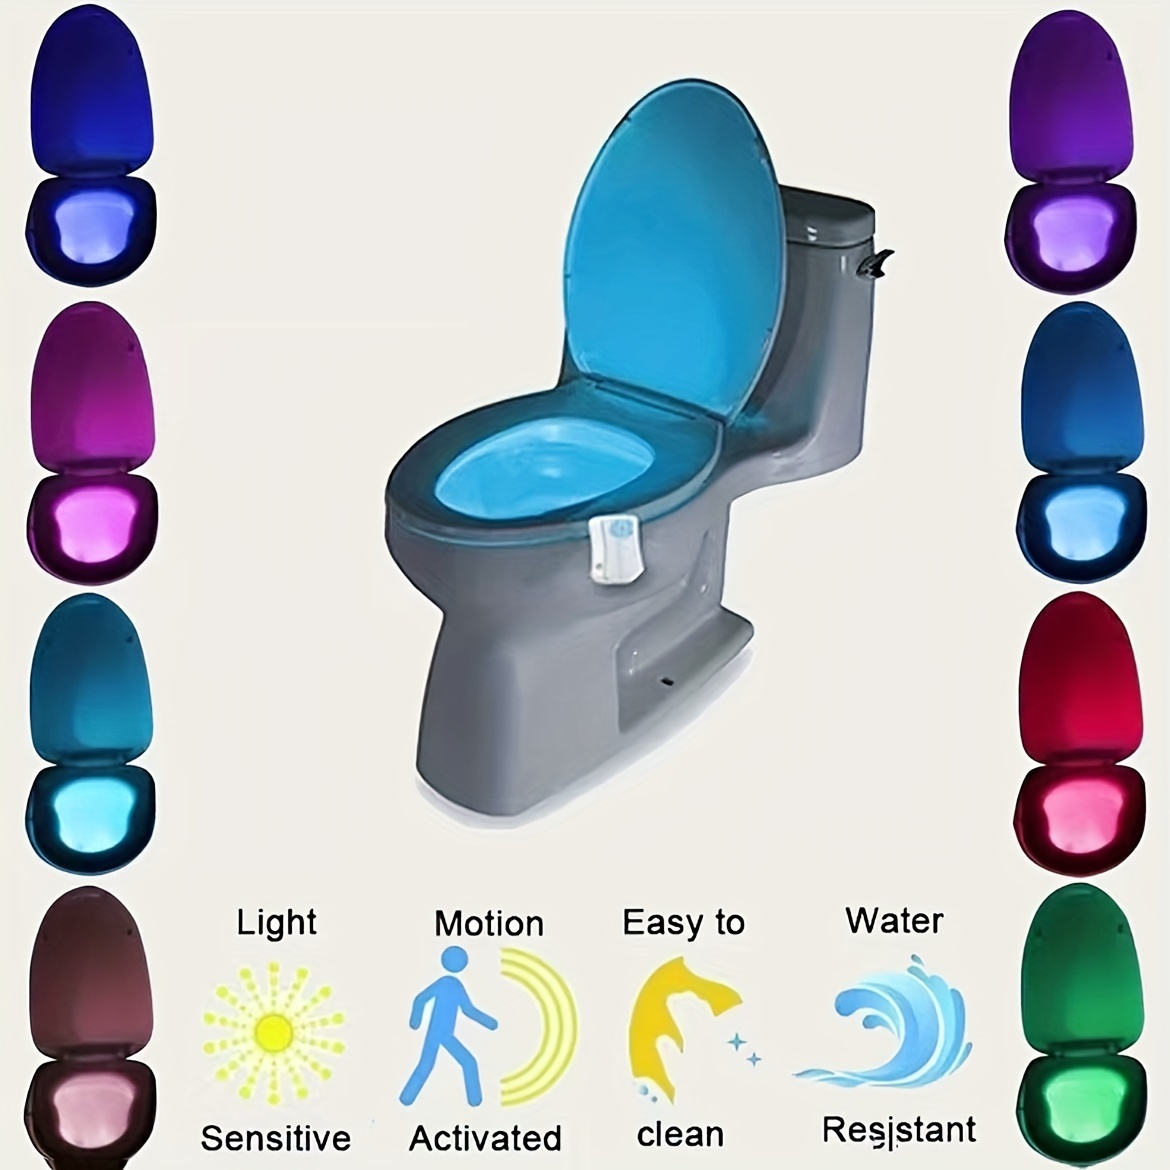 Mood Lighting For your Toilet Bowl? - 3D Prototype Design, Inc.